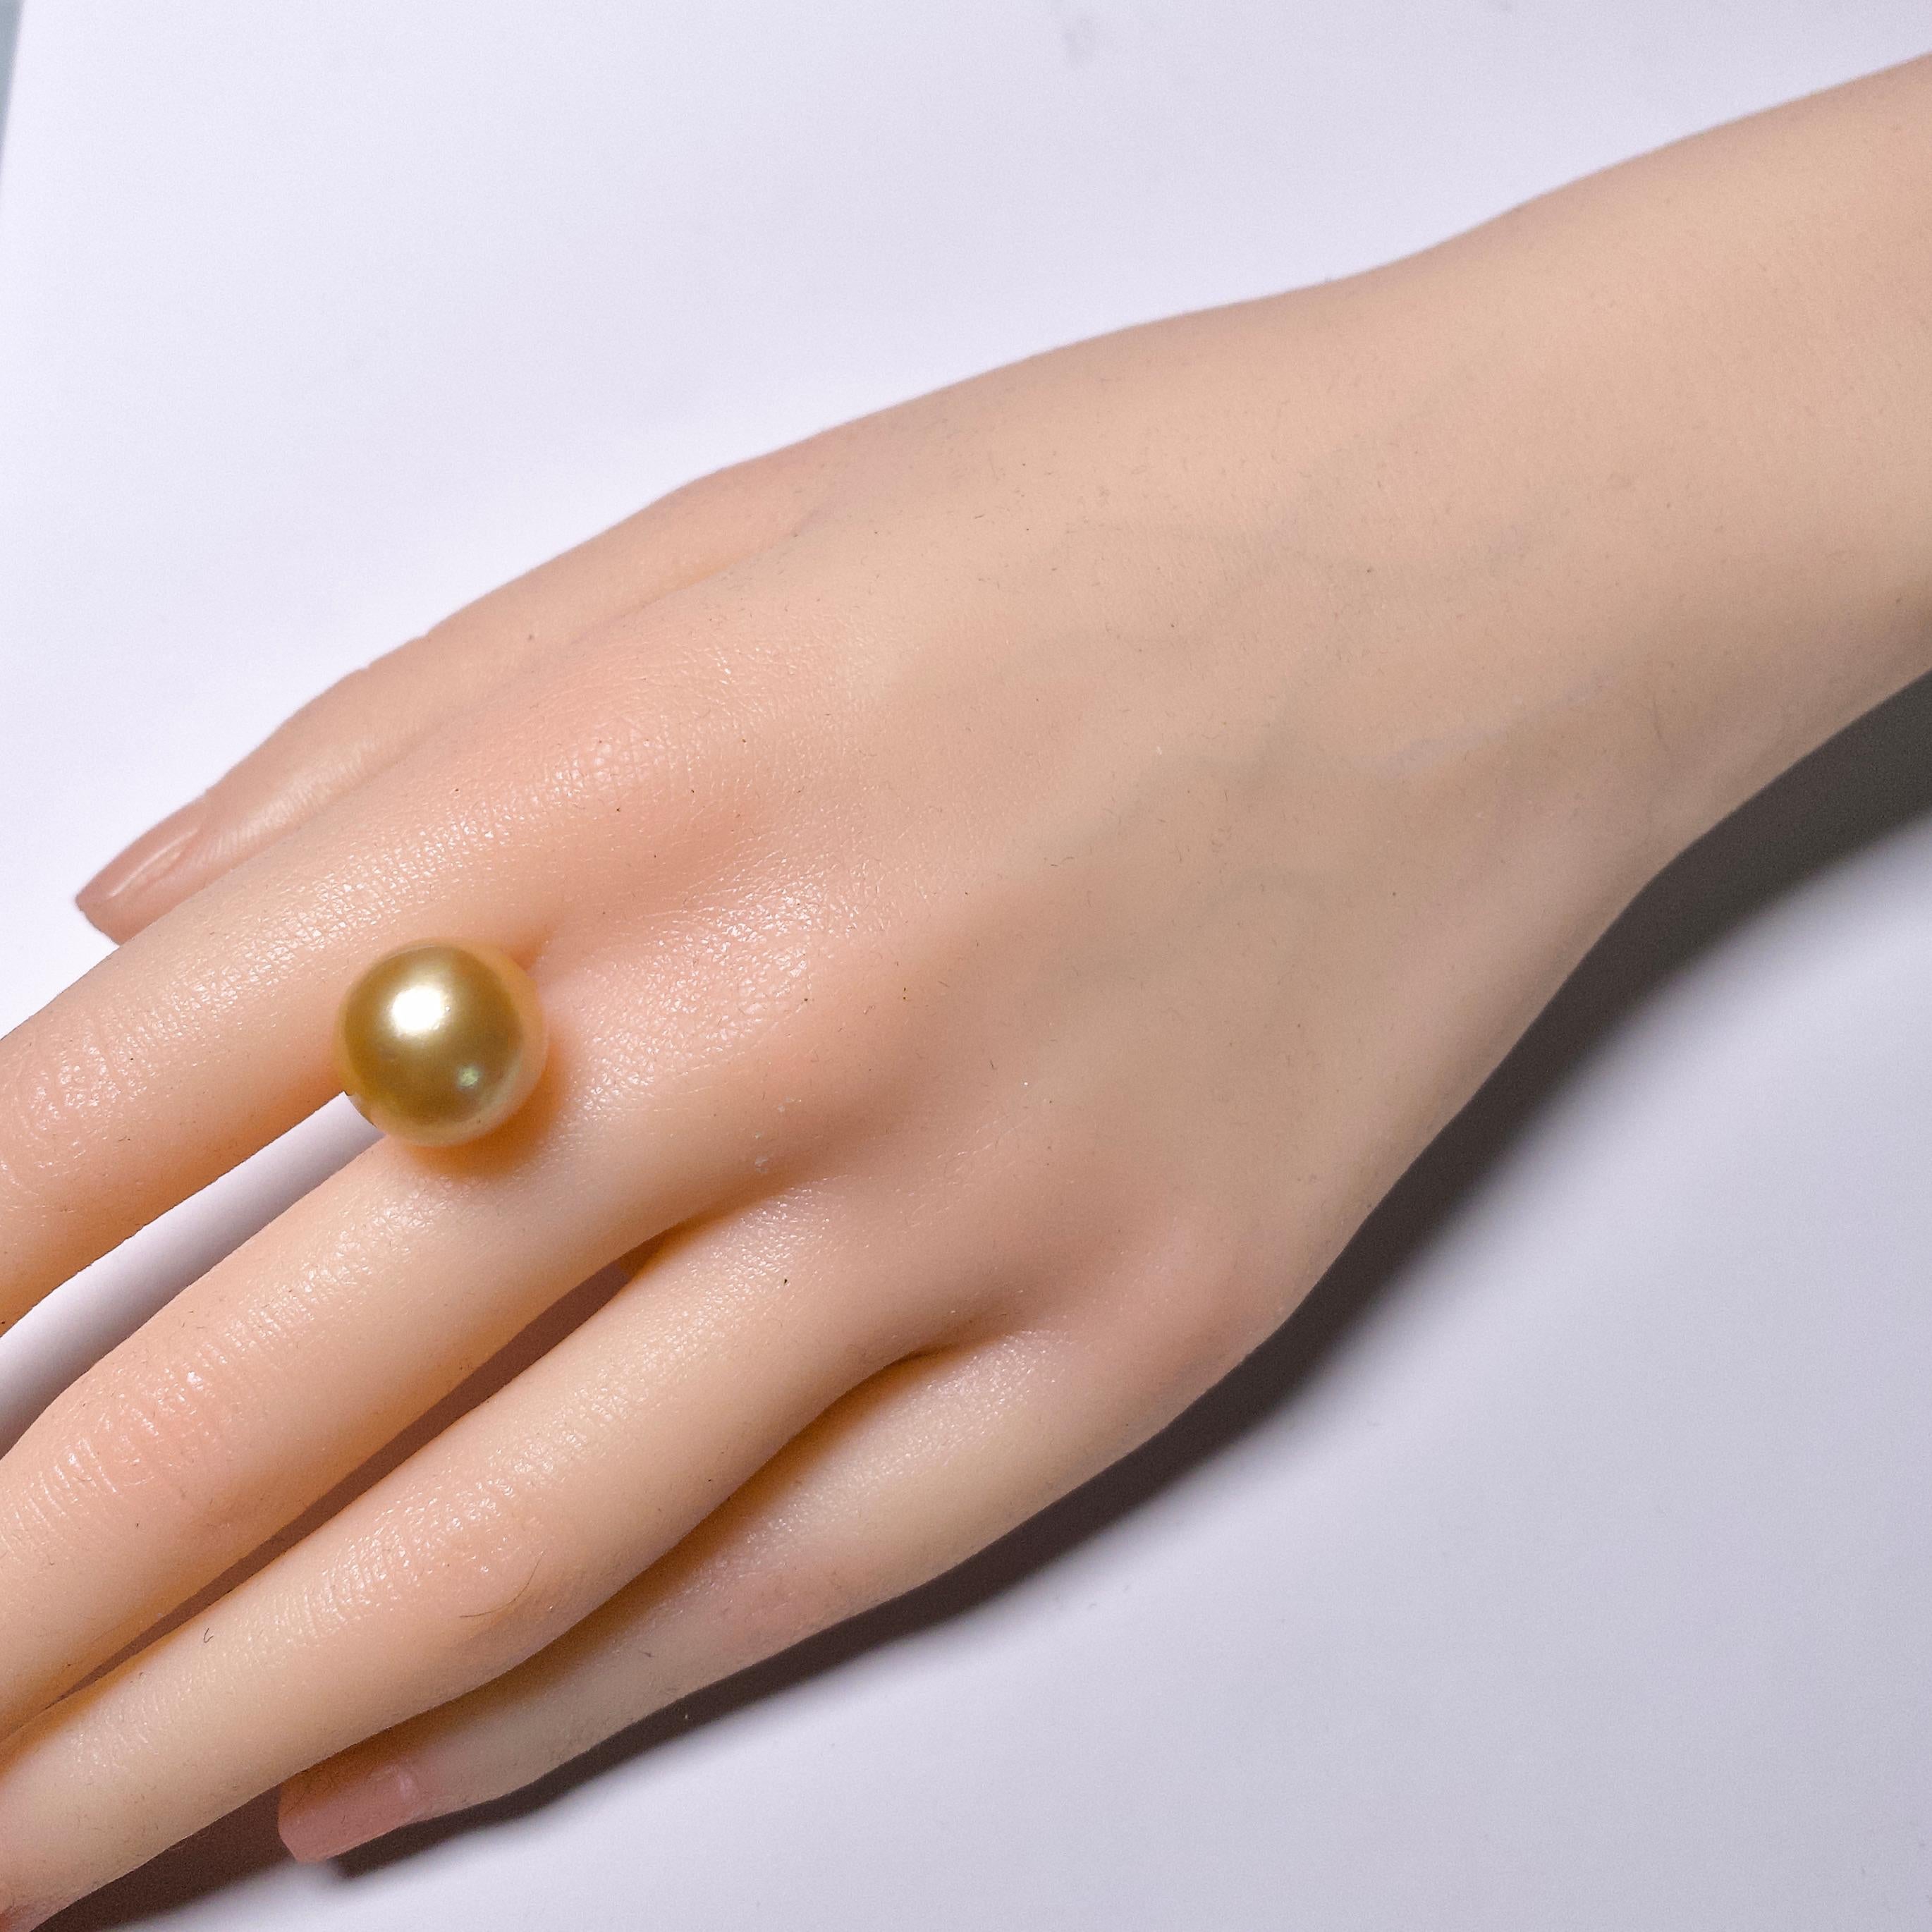 A 13.4 mm loose Golden Colour South Sea Pearl
It is a Round South Sea Pearl with good Lustre and minor surface blemishes.
It is Bright Golden colour 